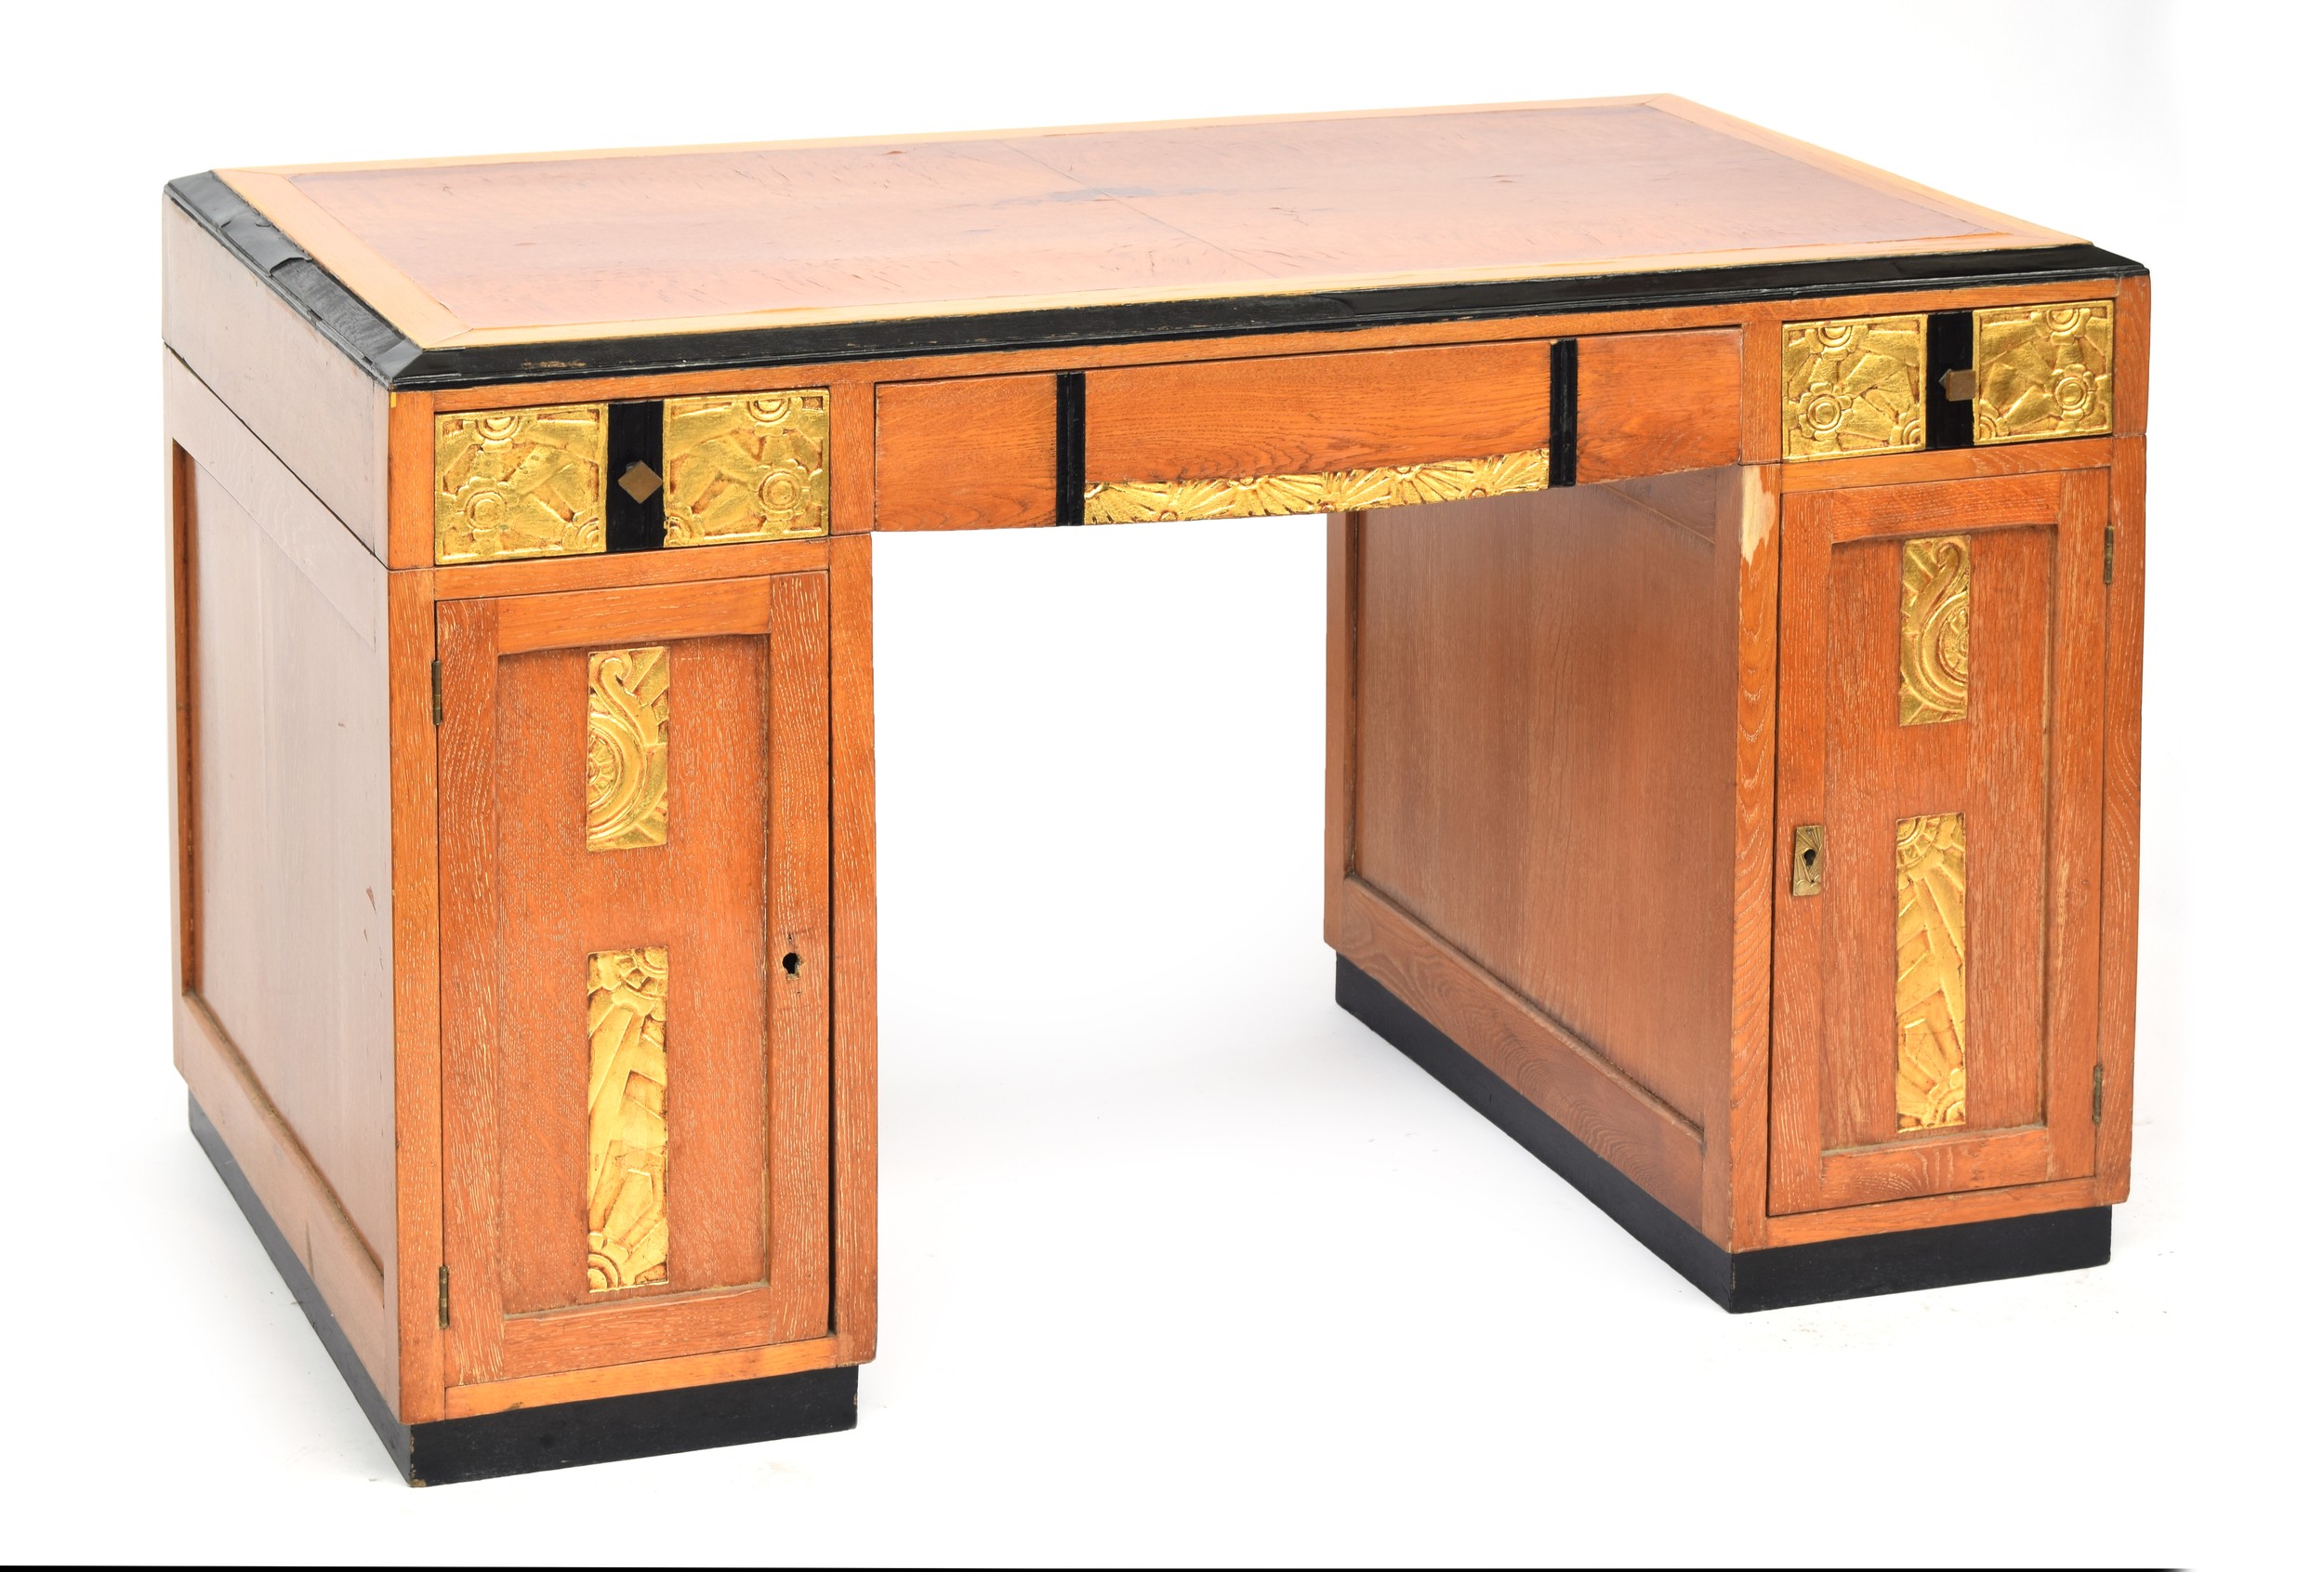 A French Art Deco pedestal desk, parcel gilt and ebonised, with carved foliate and scallop panels, - Image 2 of 11